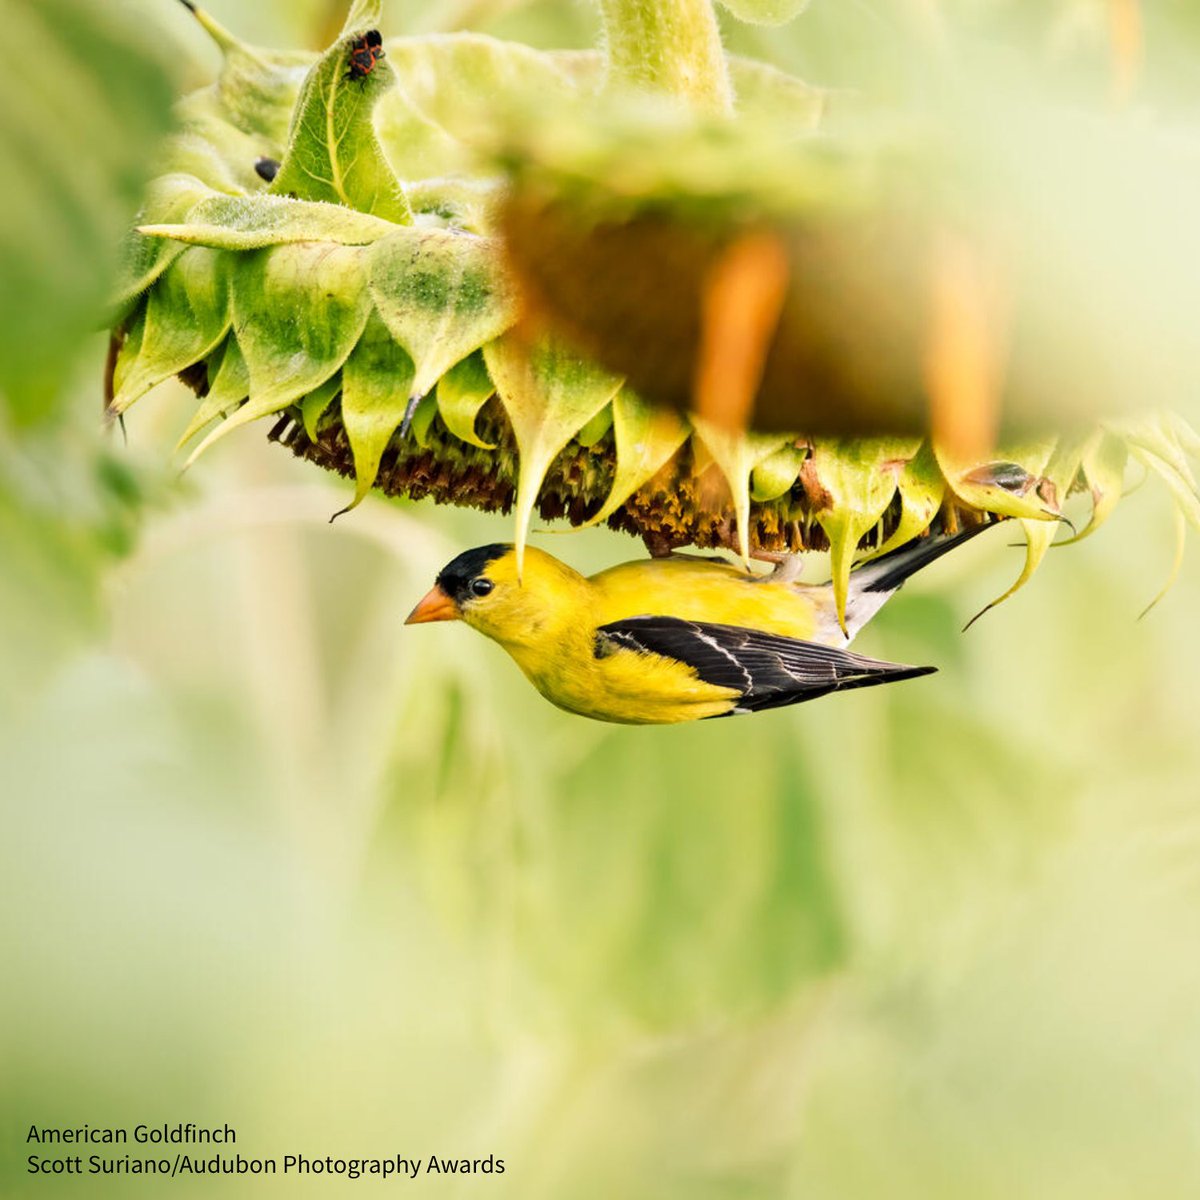 Familiar birds—like the American Goldfinch—could become seasonal rarities if we don’t #ActOnClimate. Urge your US Representative to take bold action to ensure a cleaner future and co-sponsor the bipartisan Clean Electricity & Transmission Acceleration Act: bit.ly/3JrUBOw